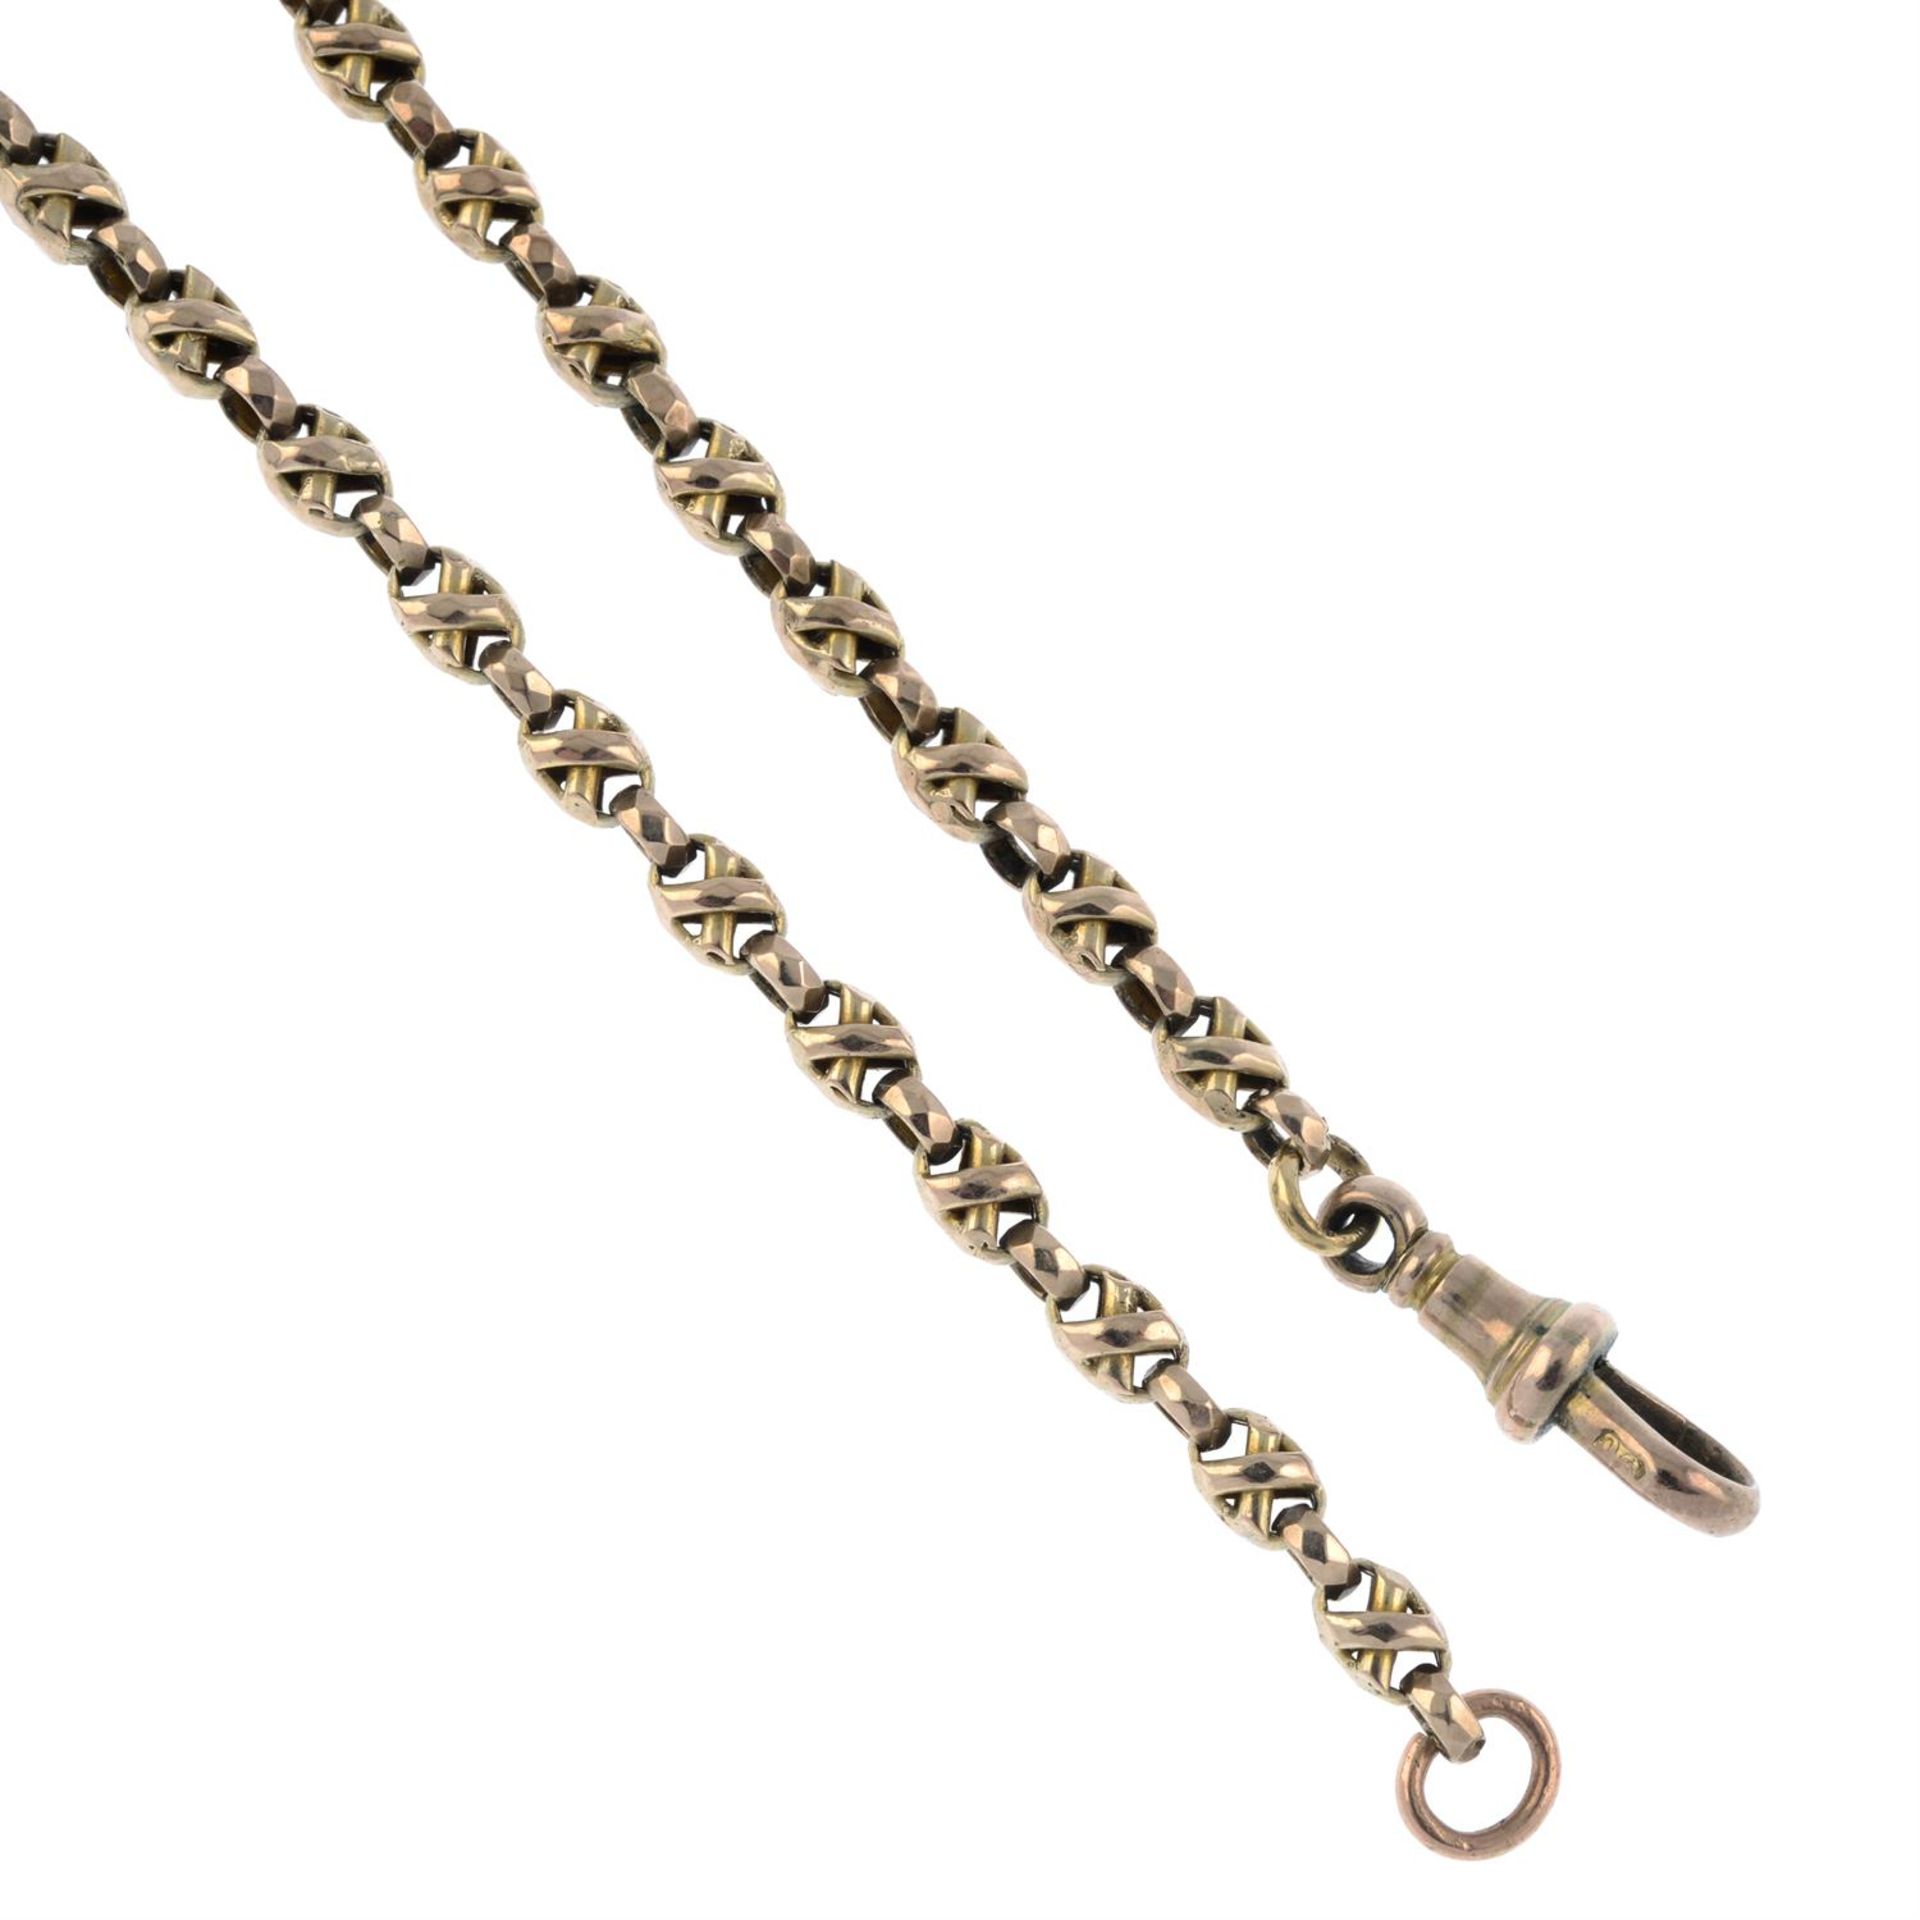 Victorian 9ct gold necklace - Image 2 of 2